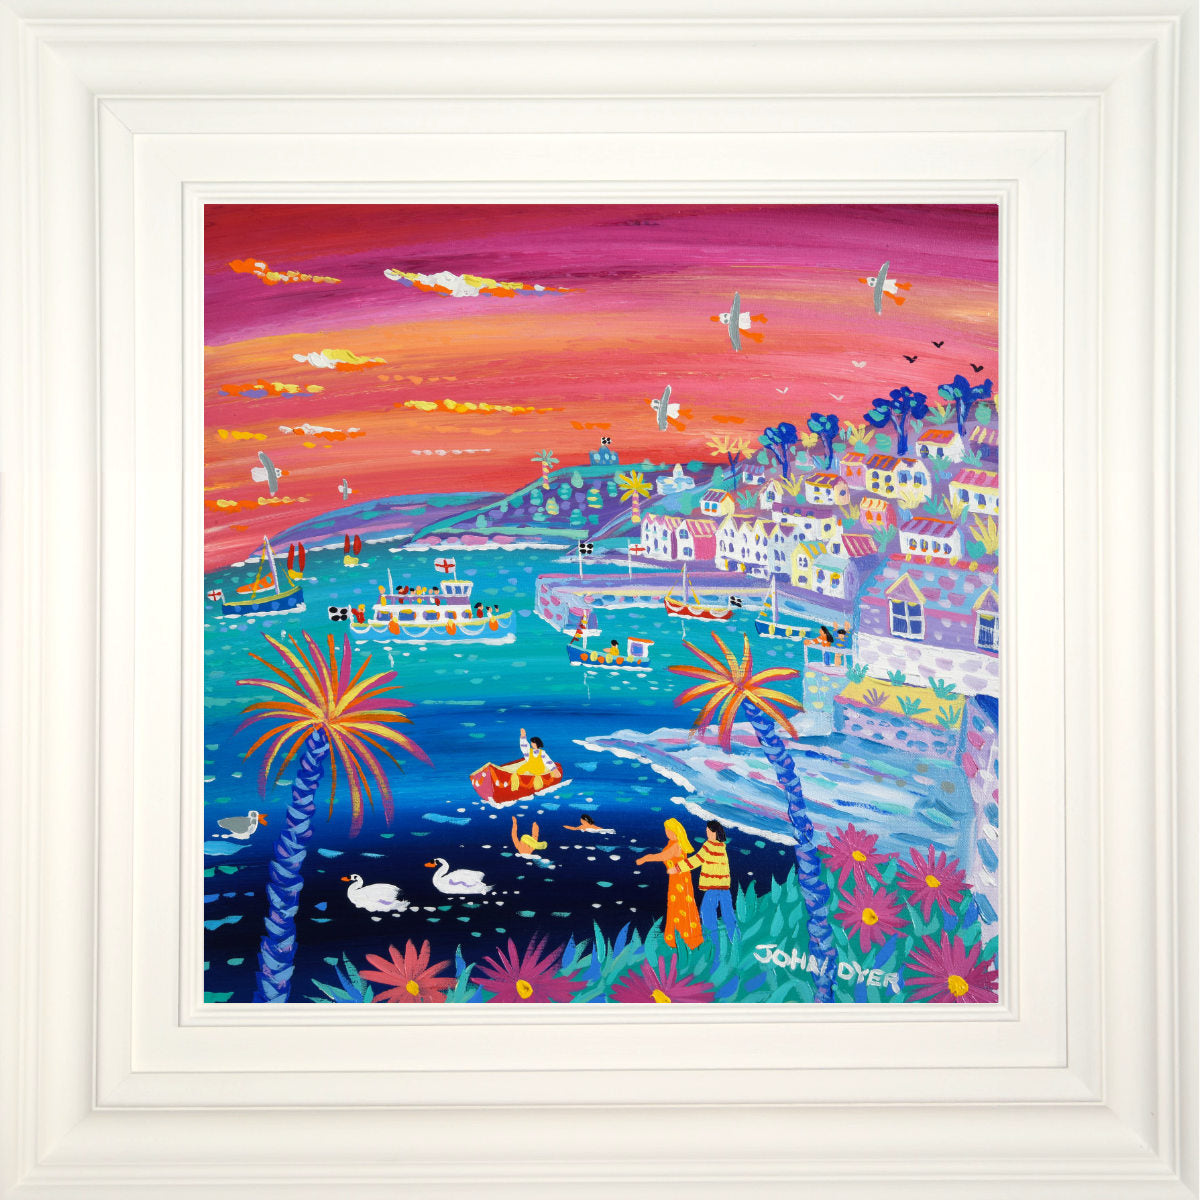 'Romantic Sunset, St Mawes', 18x18 inches acrylic on canvas. Cornwall Painting by Cornish Artist John Dyer. Cornish Art from our Cornwall Art Gallery